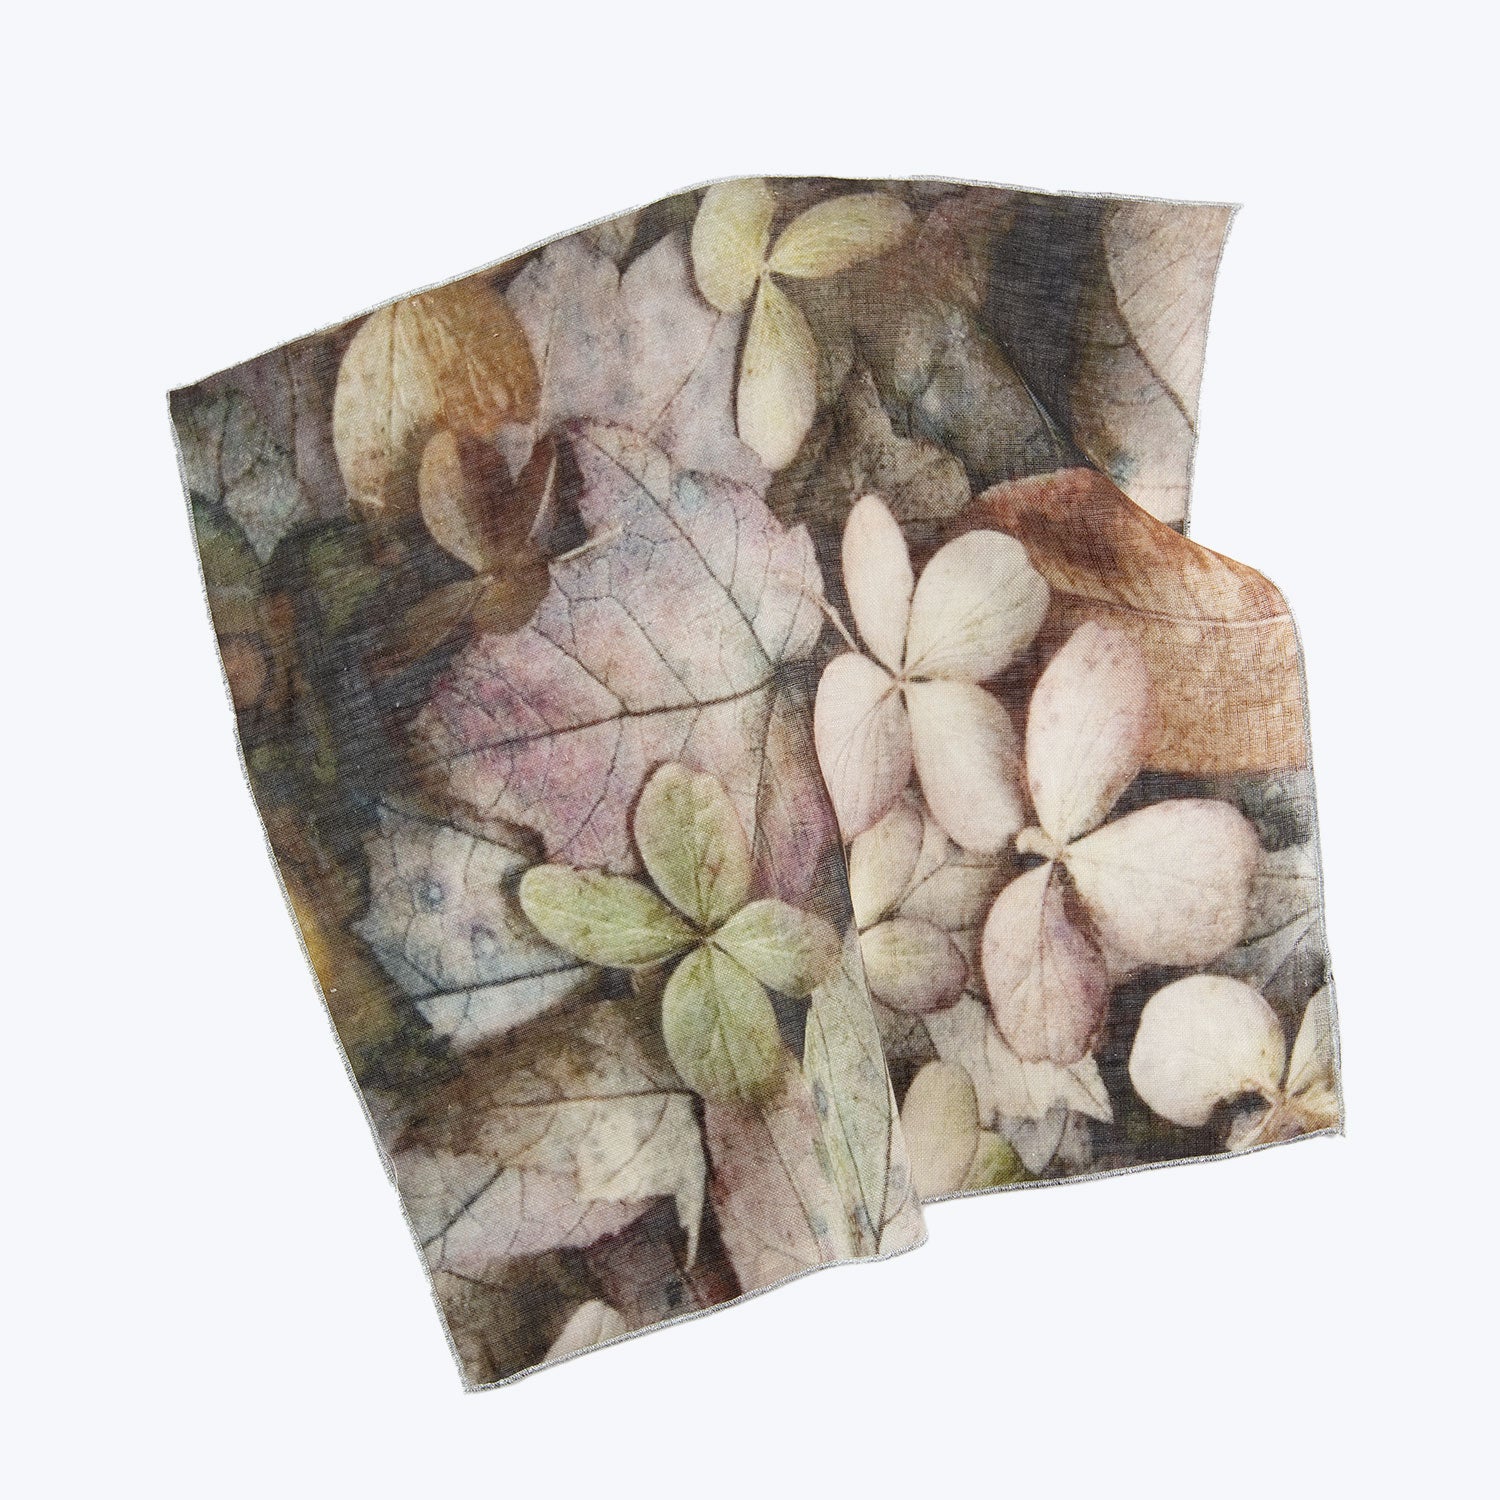 Colorful autumn leaves printed on crinkled paper, creating depth and texture.